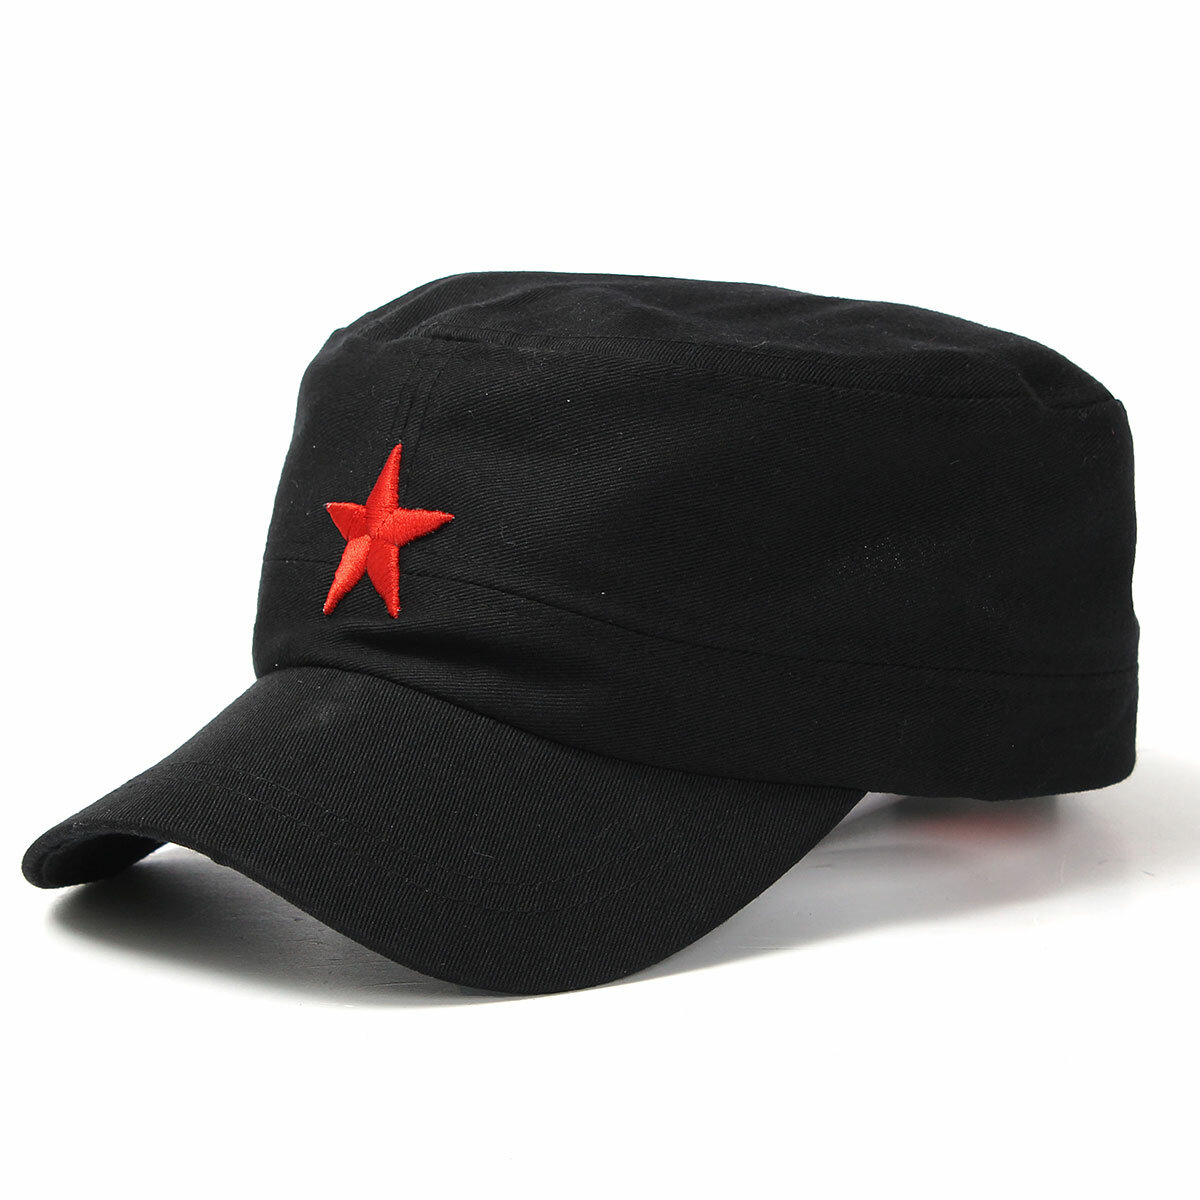 UnisexRed Star Cotton Army Cadet Military Cap Adjustable Durable Flat Top Hats